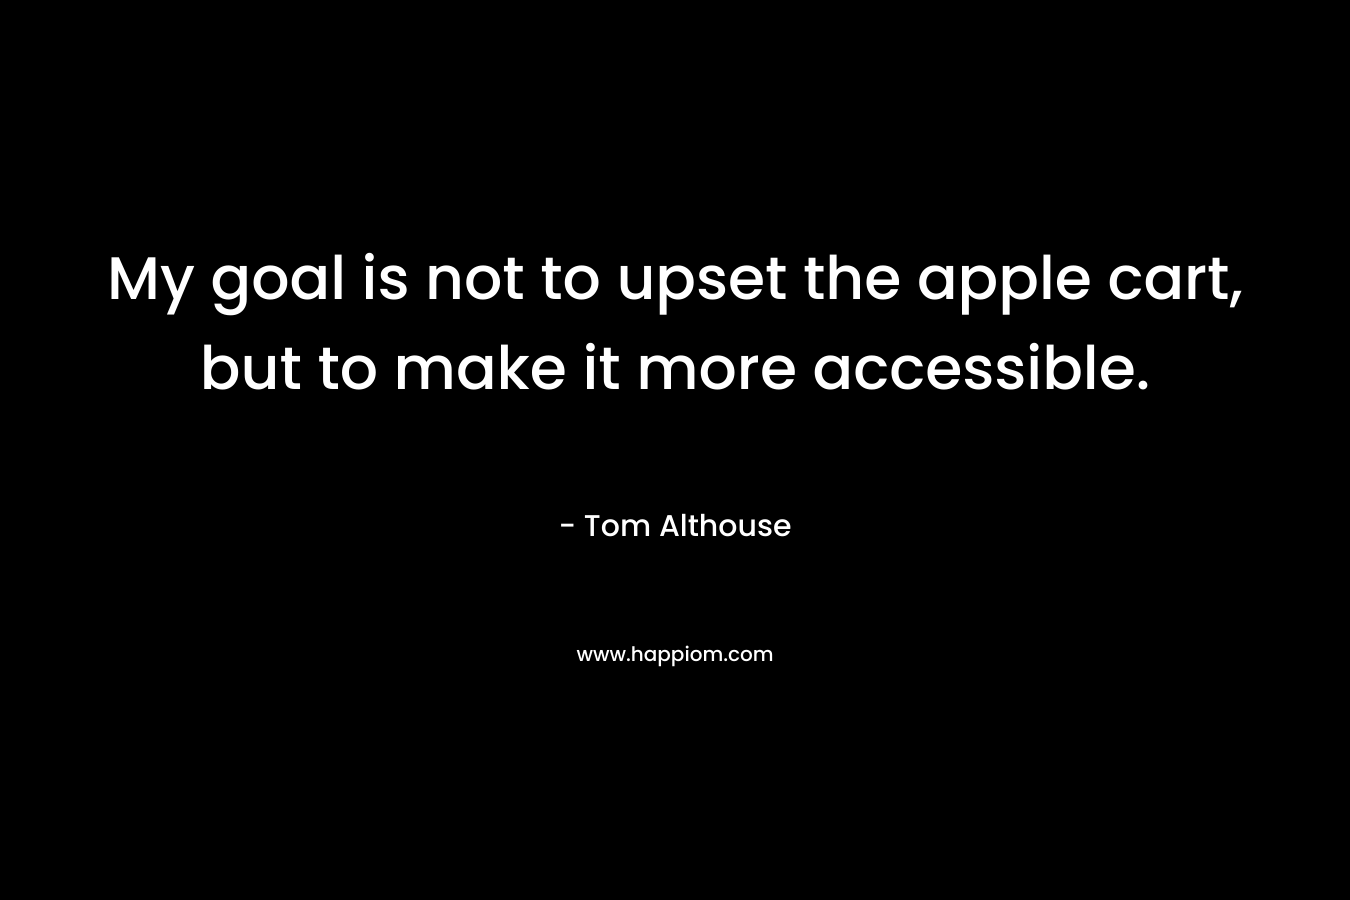 My goal is not to upset the apple cart, but to make it more accessible. – Tom Althouse